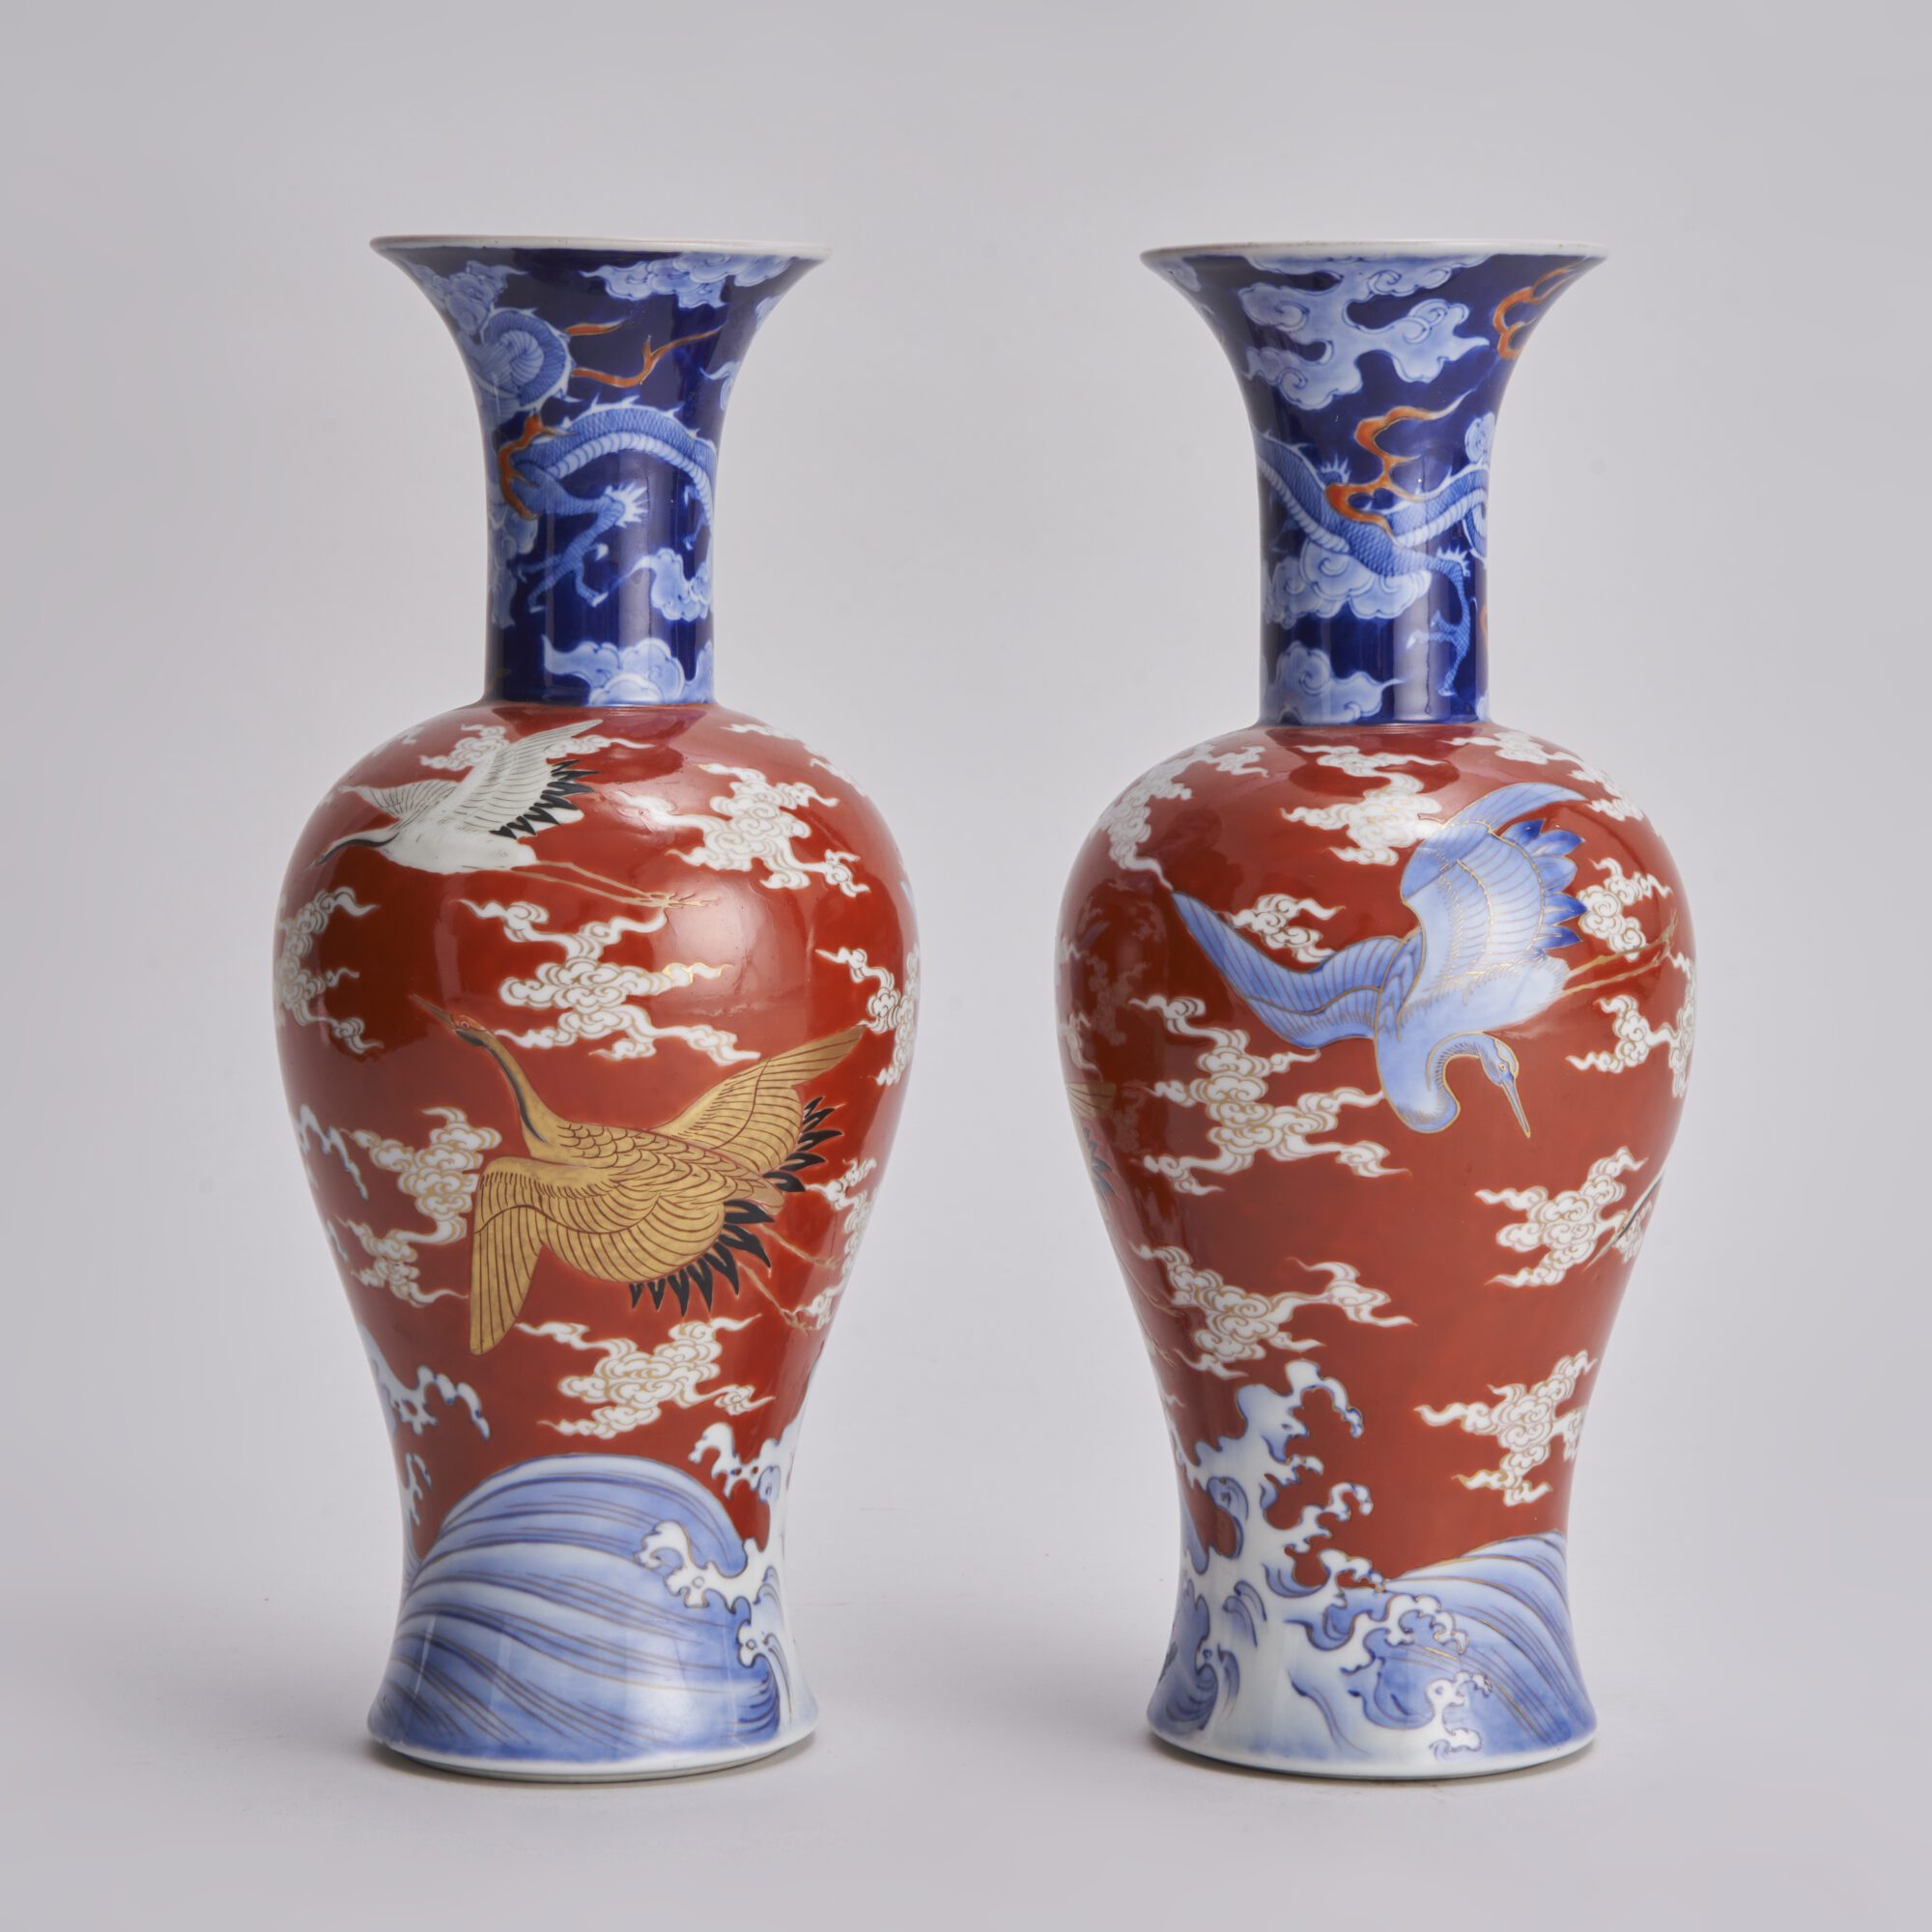 An attractive pair of Japanese, 19th Century Fukagawa porcelain vases from Kevin Page